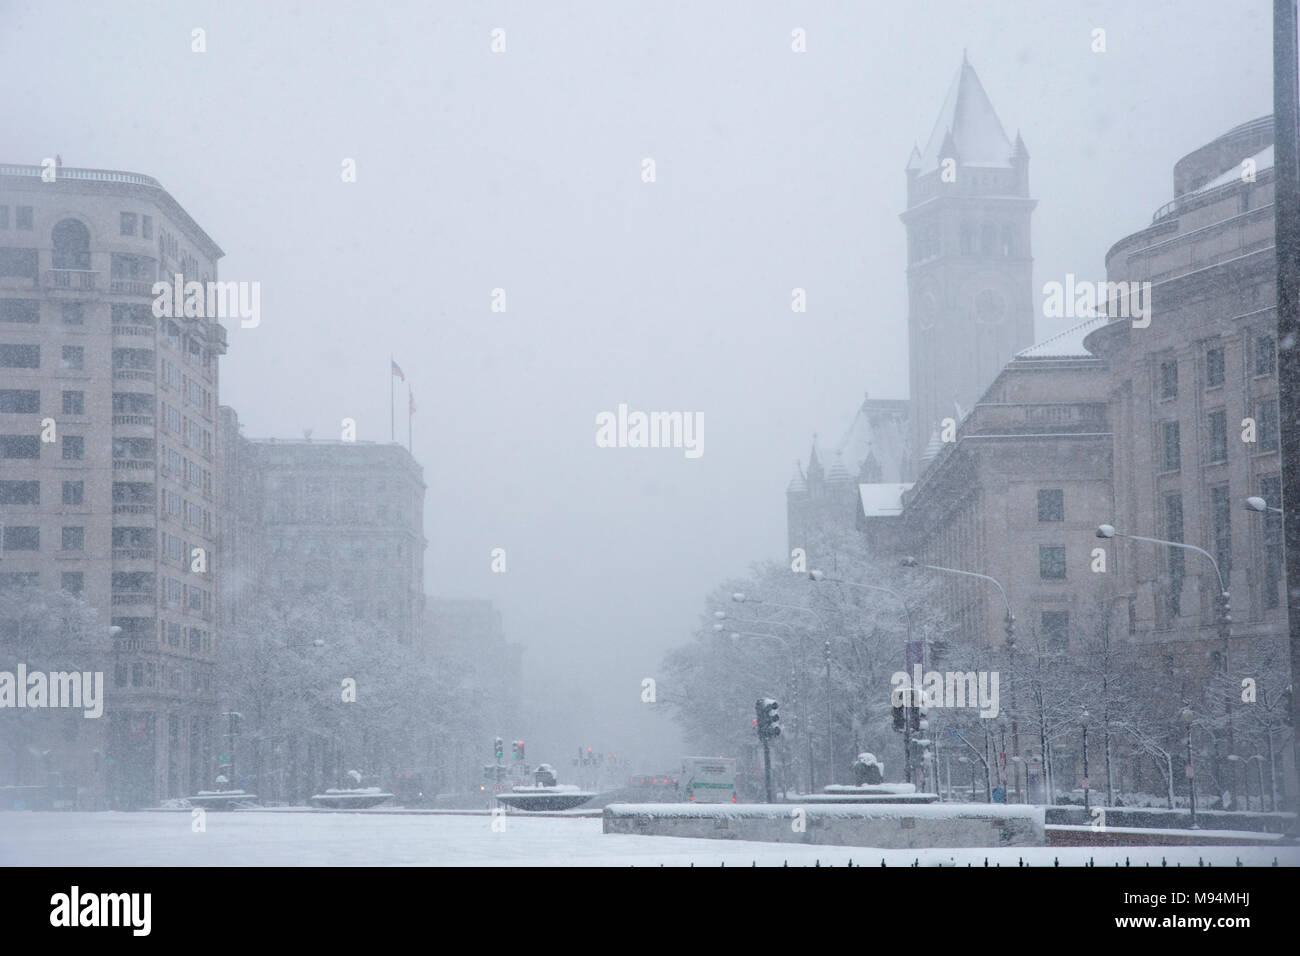 Washington, USA. 21st March, 2018. shington, DC, March 21, 2018. U.S. Capitol, normally seen jn the middle of this view, is obscured by snow and fog. Credit: Tim Brown/Alamy Live News Credit: Tim Brown/Alamy Live News Stock Photo